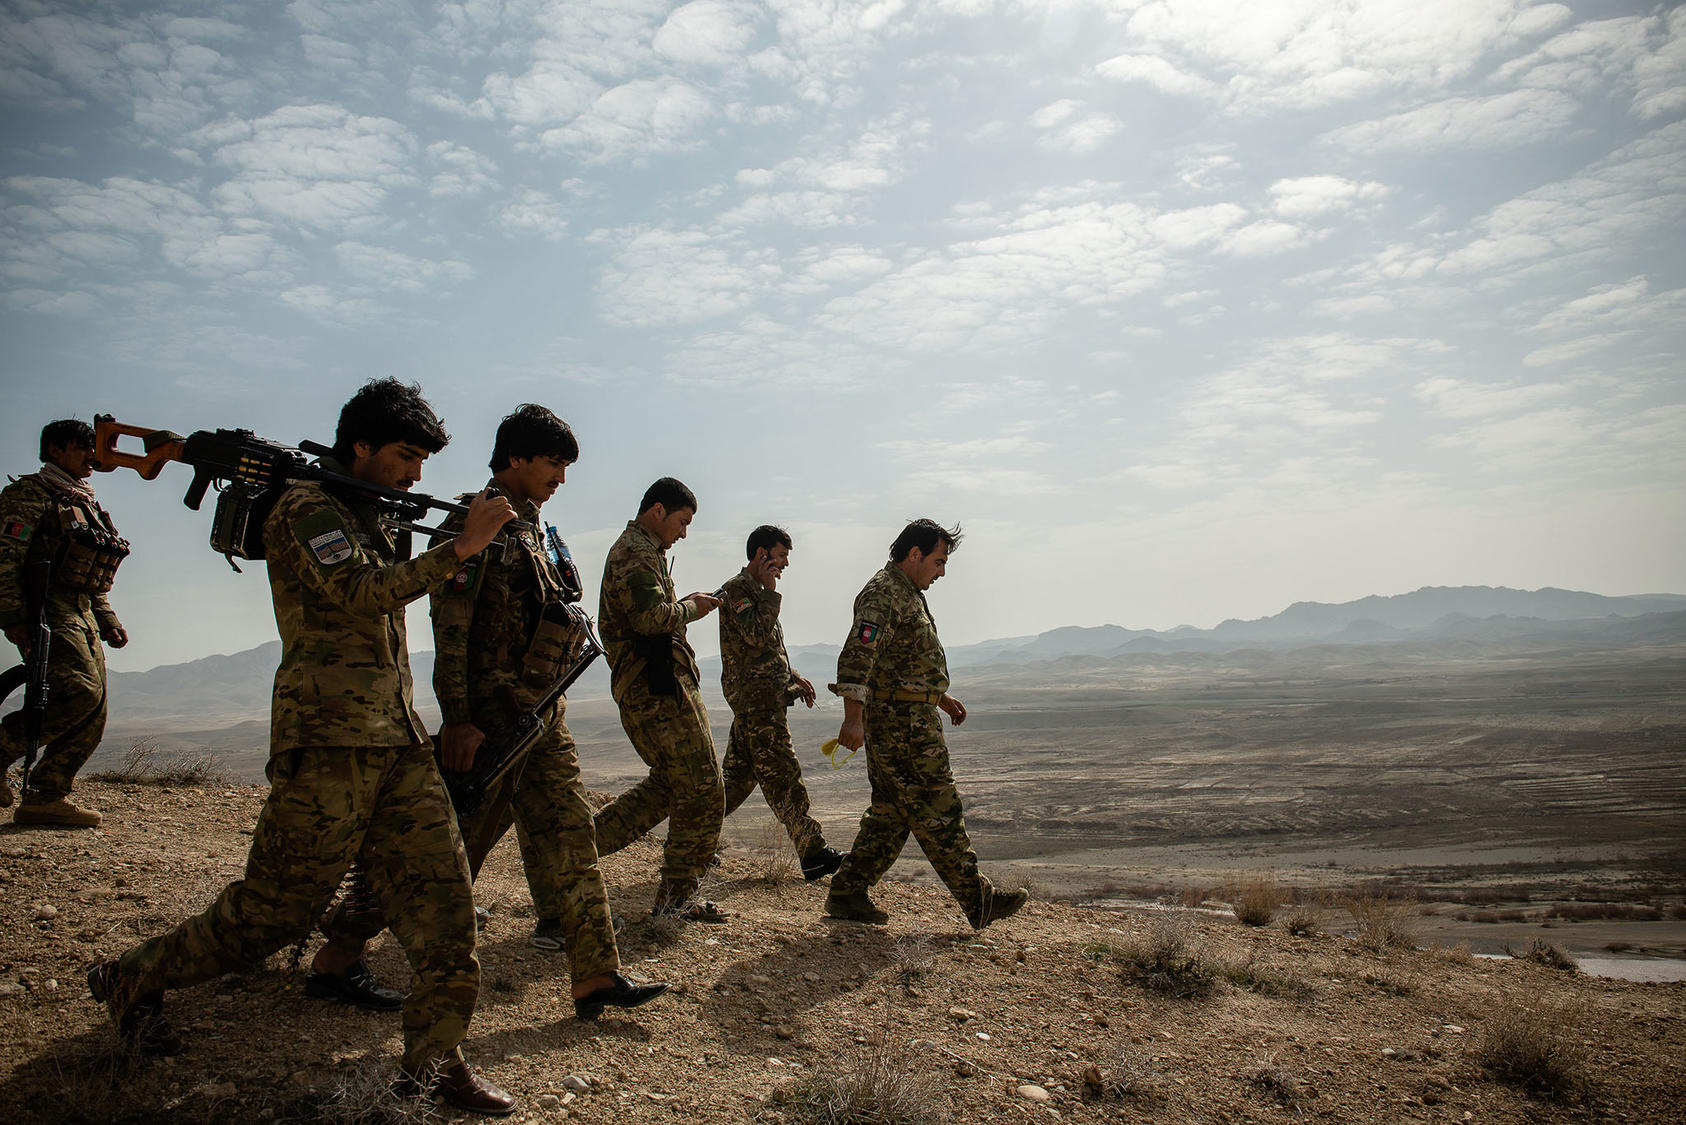 Lt. Col. Musa-Kalim Rodwal, the commander of an Afghan police unit, leads a group of police officers in Zabul Province, in Afghanistan on Sunday, Feb. 23, 2020. (Kiana Hayeri/The New York Times)